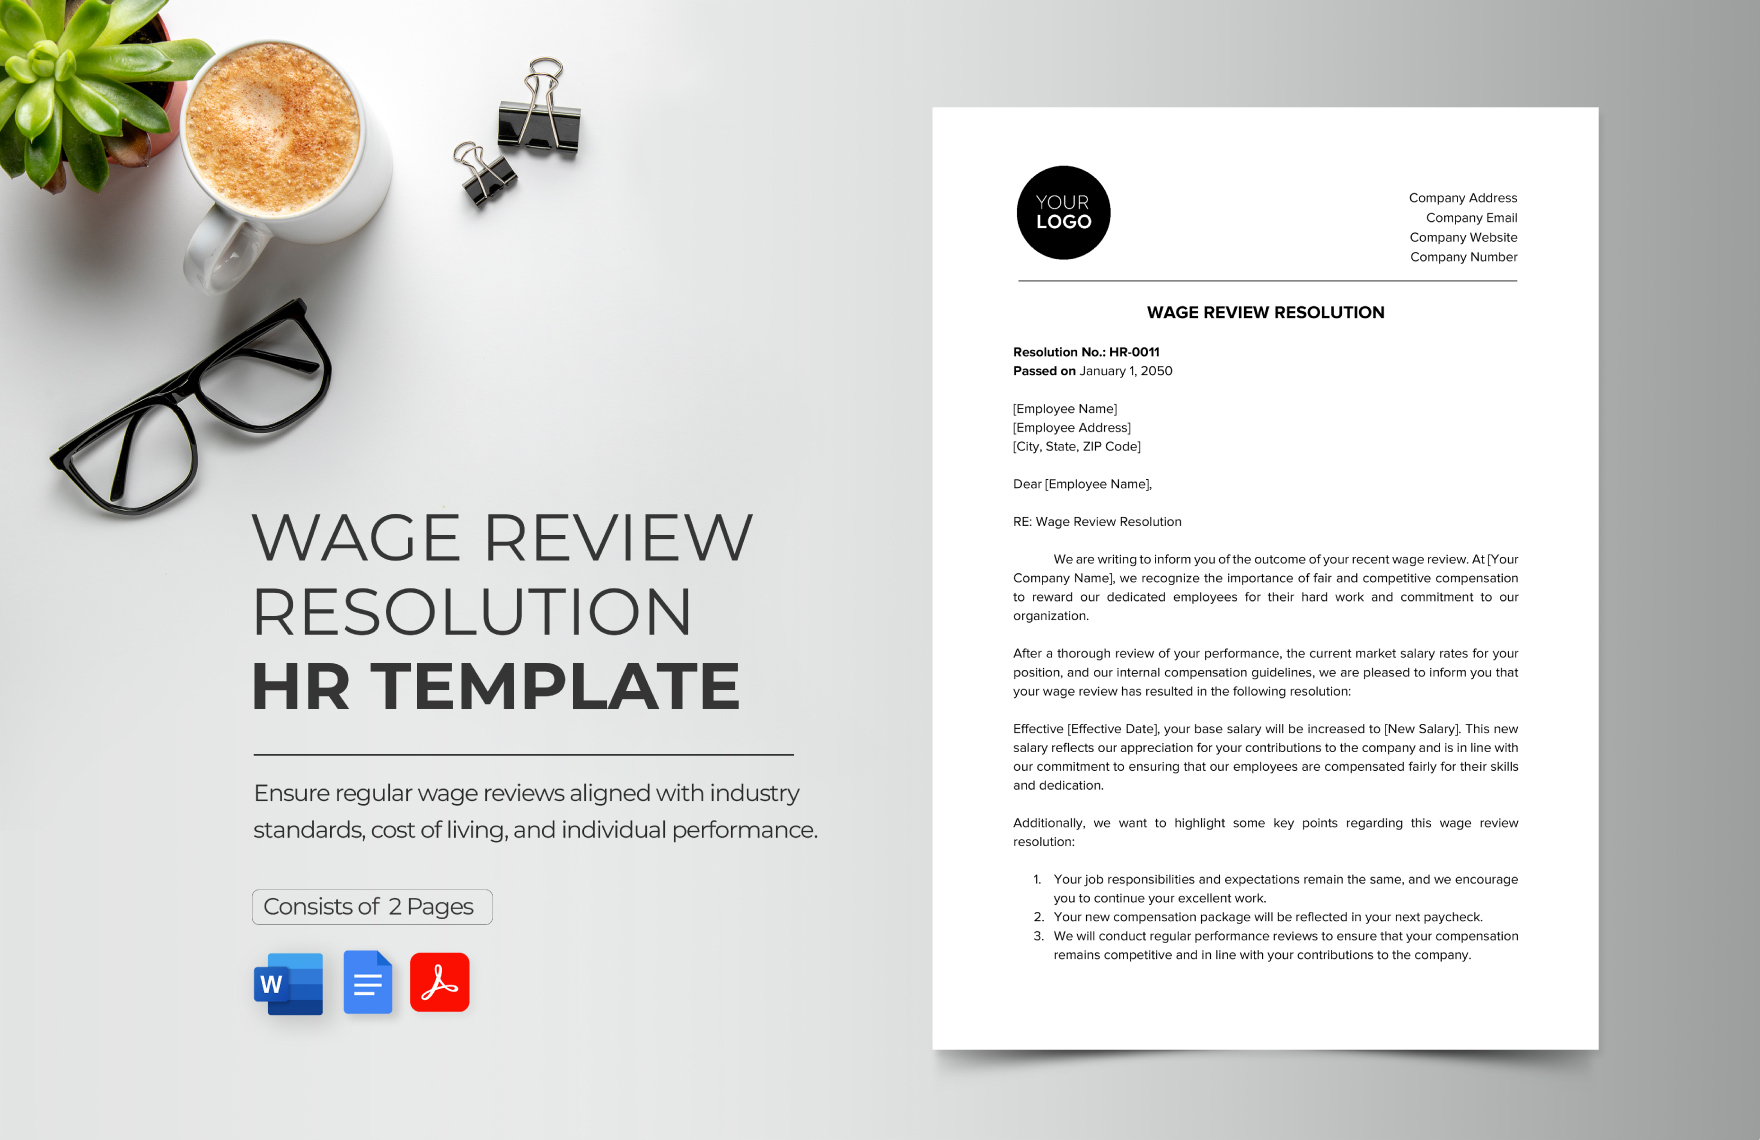 Wage Review Resolution HR Template in Word, Google Docs, PDF